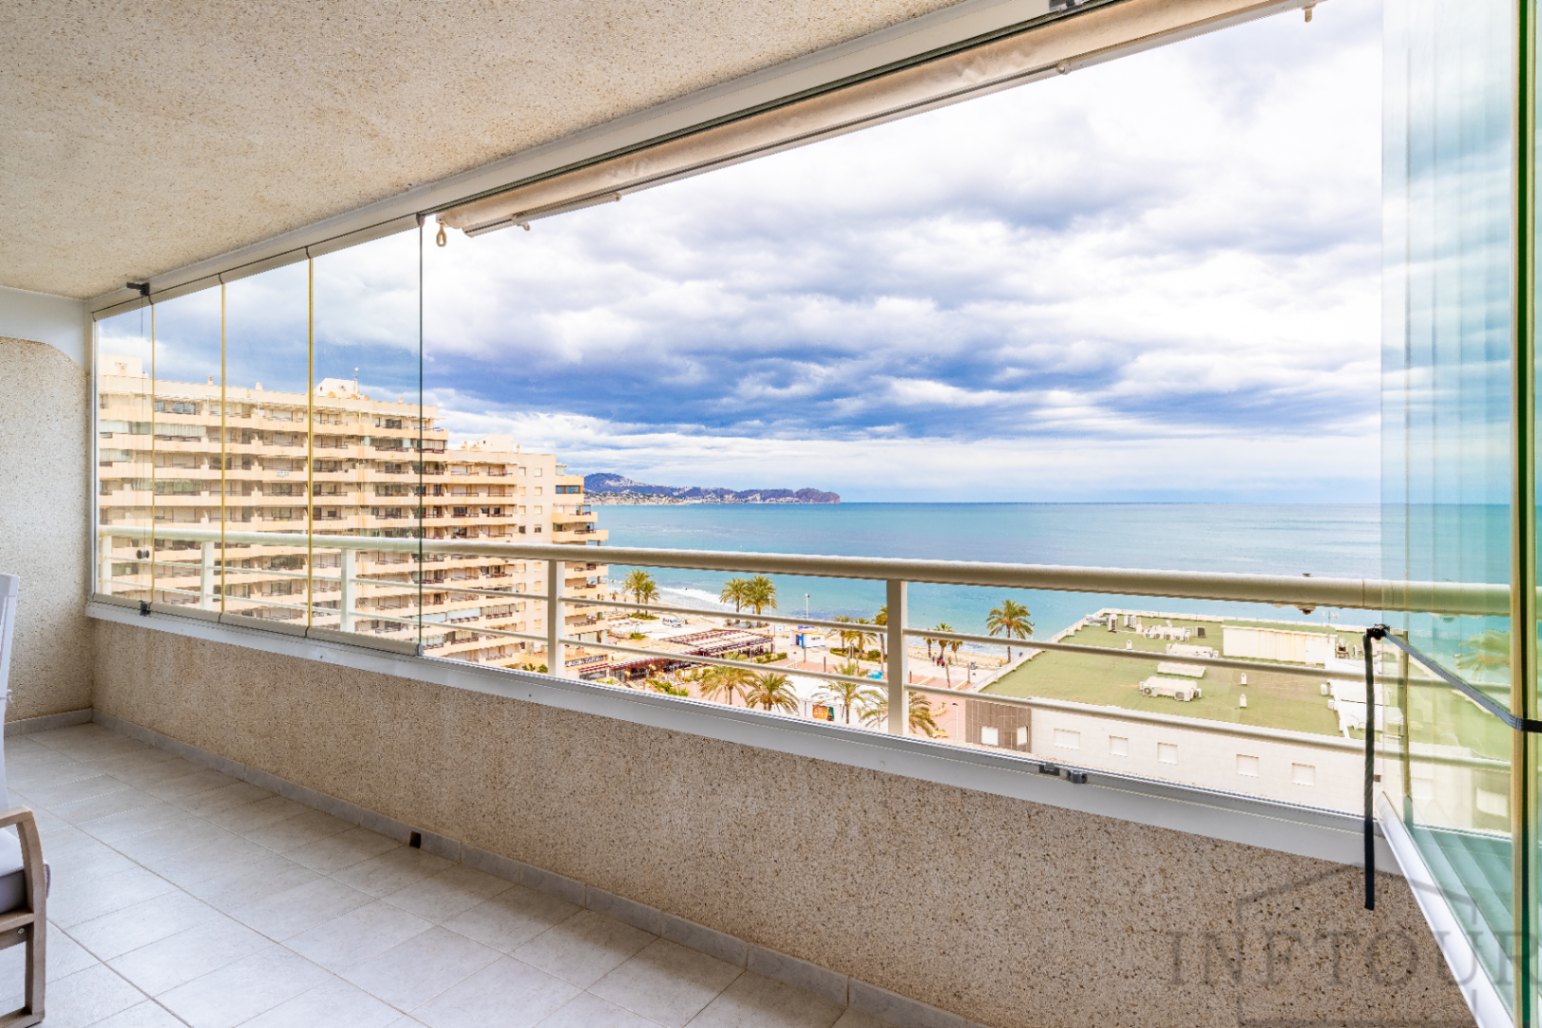 Apartment for sale with sea views in Calpe